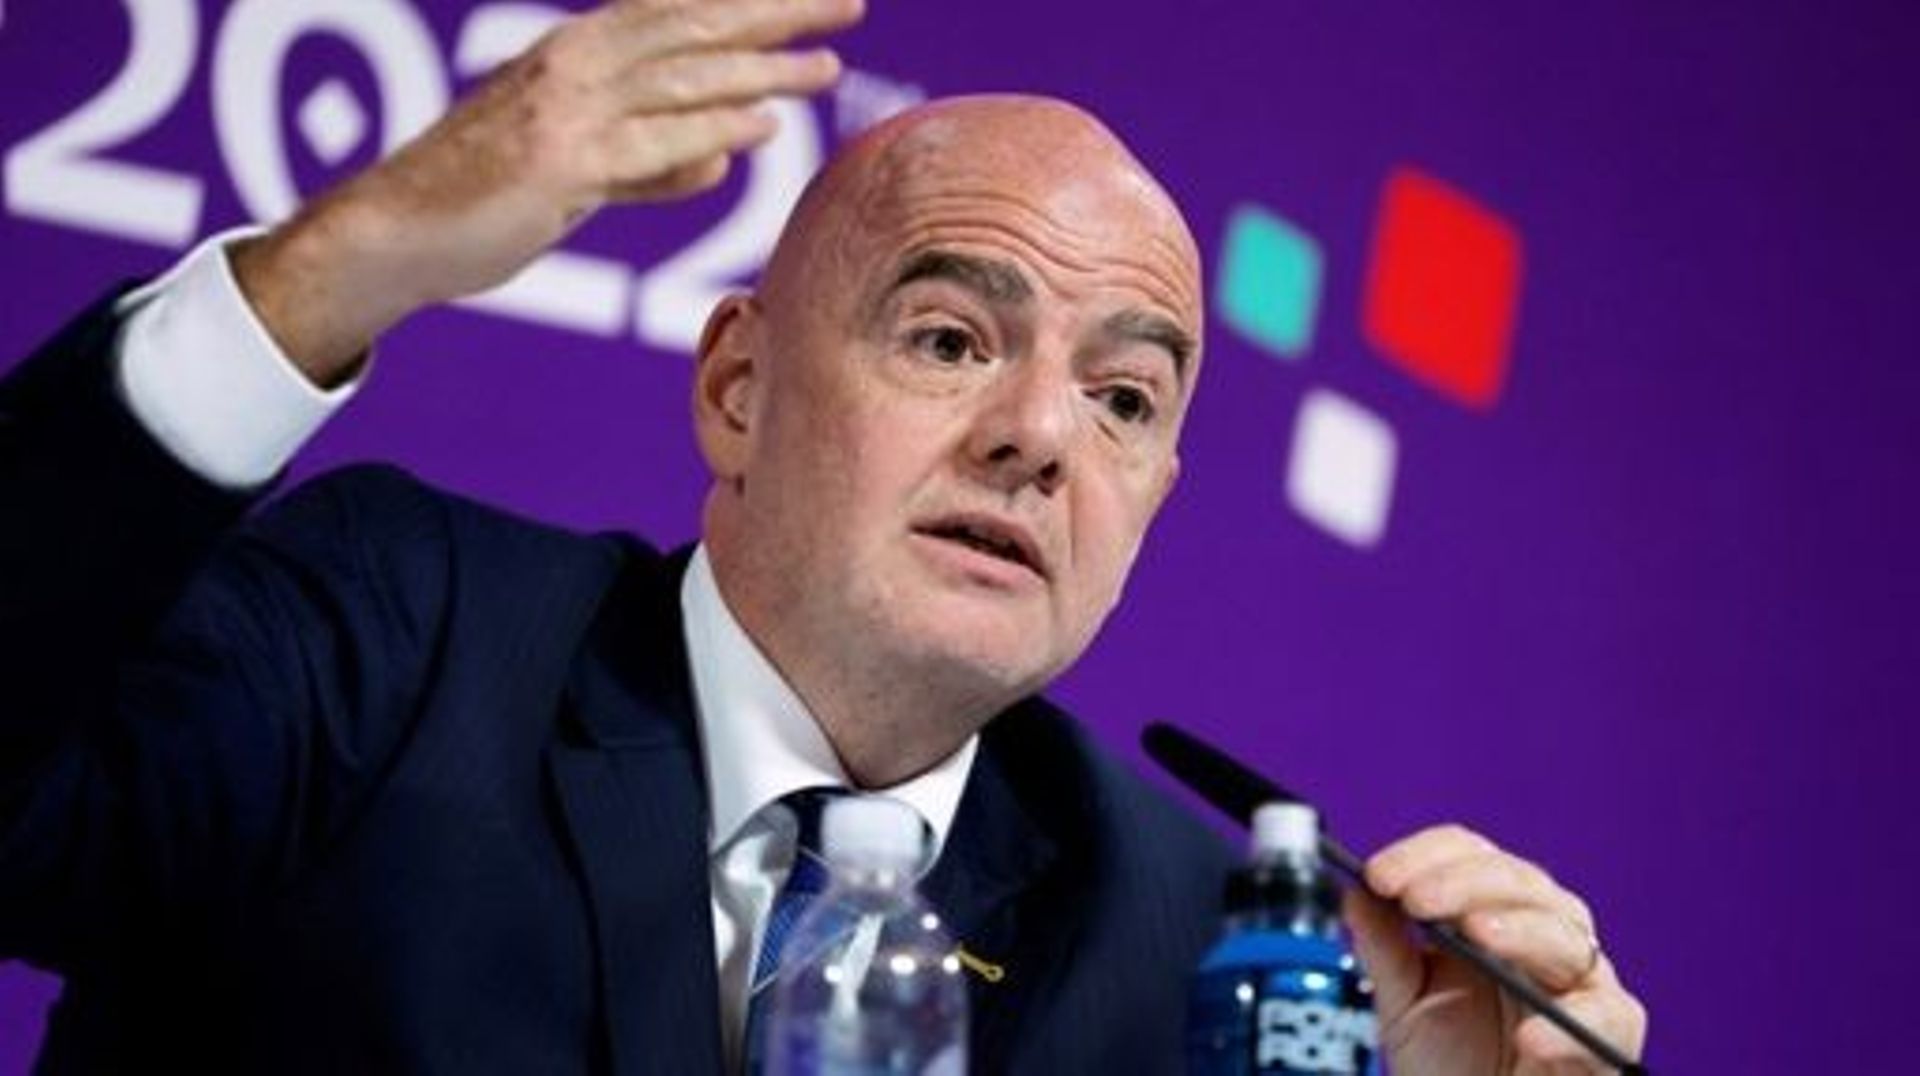 FIFA President Gianni Infantino gives a press conference Qatar National Convention Center (QNCC) in Doha on December 16, 2022, during the Qatar 2022 World Cup football tournament.  Odd ANDERSEN / AFP